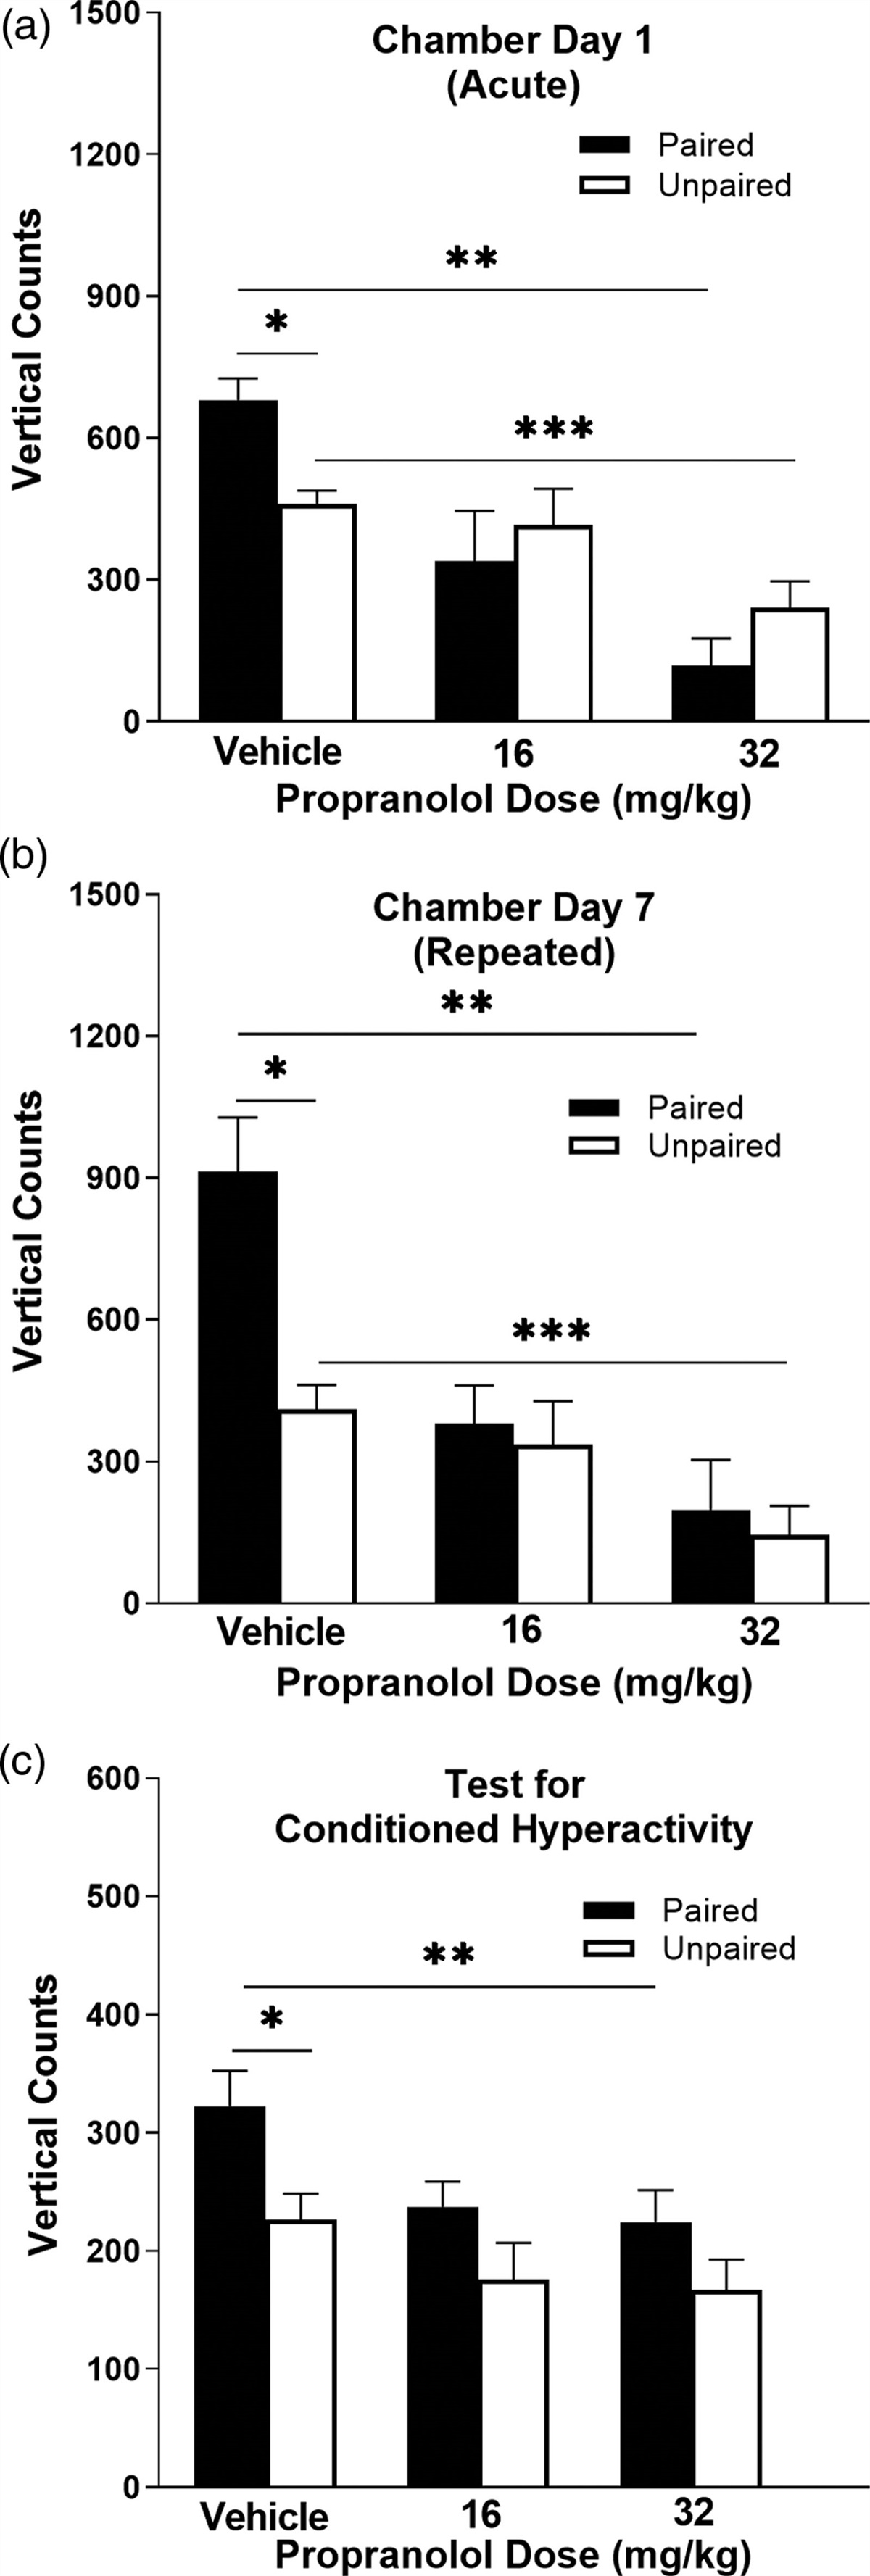 Propranolol blocks the unconditioned and conditioned hyperactive effects of methamphetamine in CD-1 mice